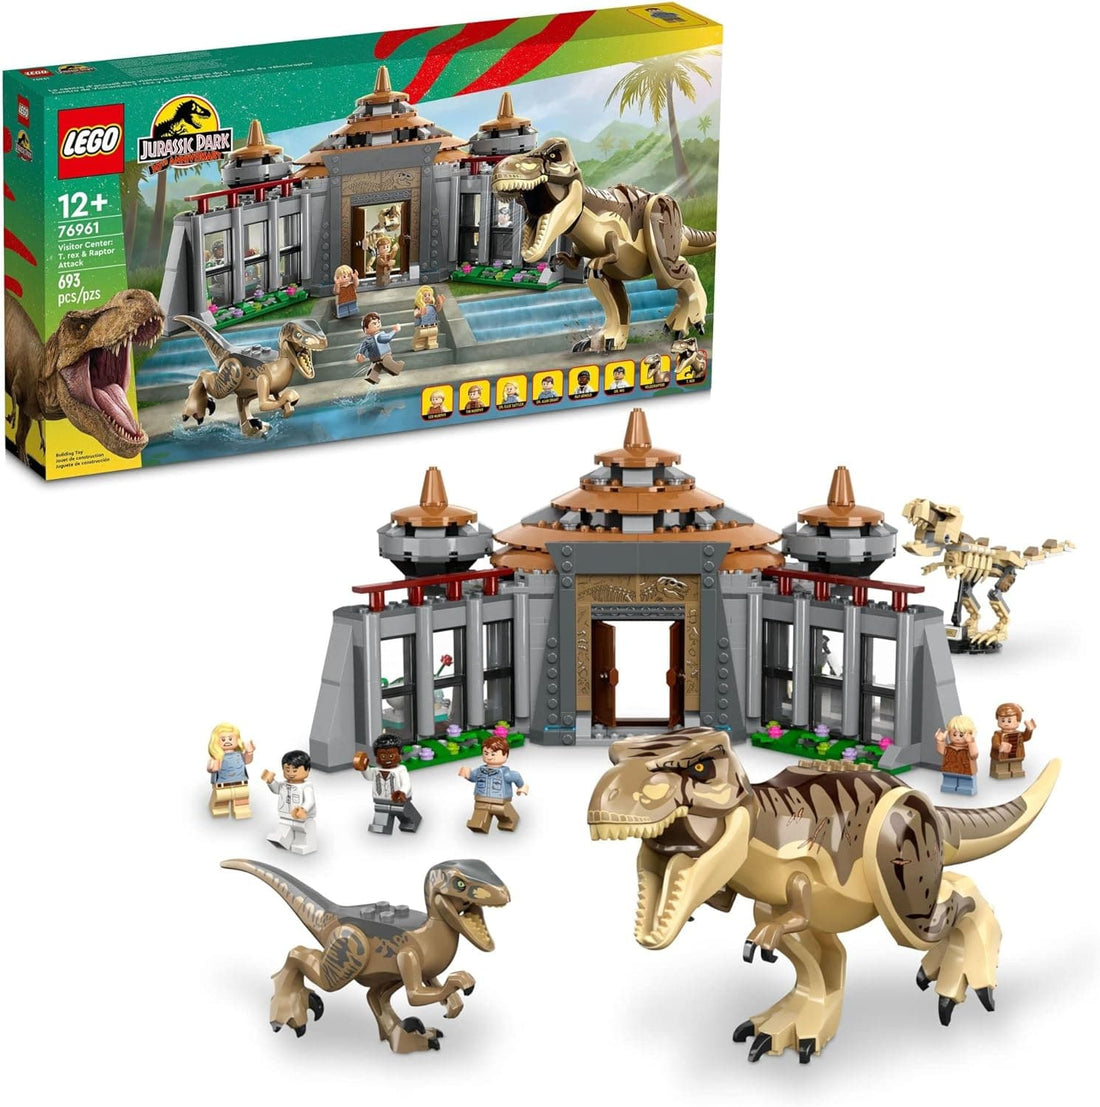 LEGO Jurassic Park Visitor Center: T. rex & Raptor Attack Buildable Dinosaur Toy Including a Dino Skeleton Figure, 6 Minifigures and More - best price from Maltashopper.com 76961